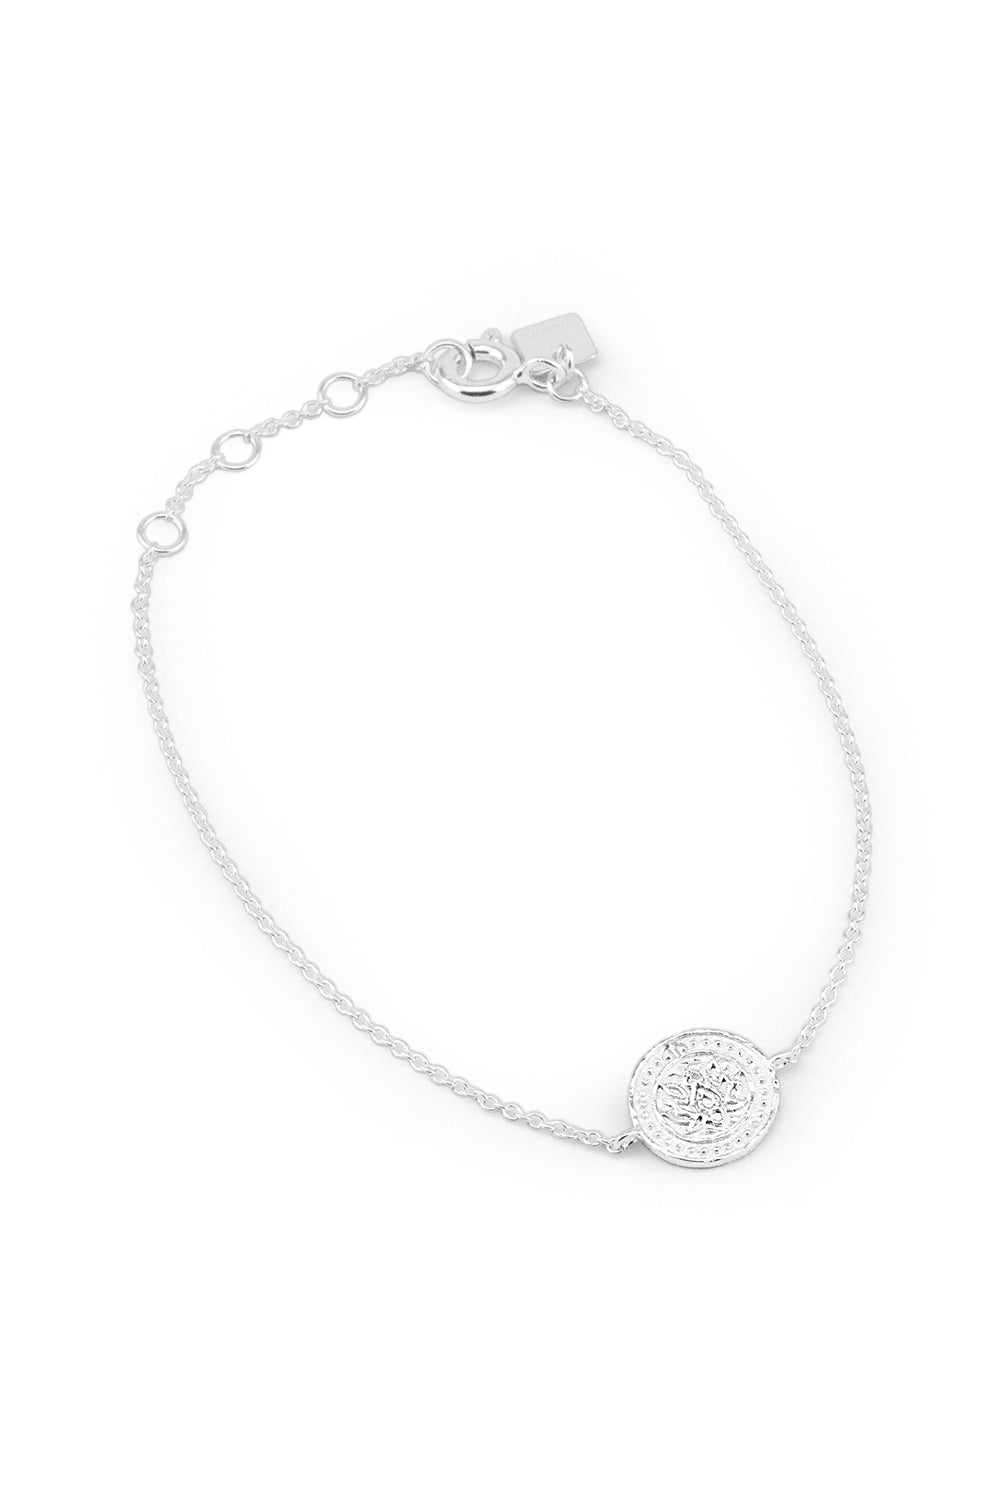 BY CHARLOTTE LOTUS BRACELET SILVER PLATED